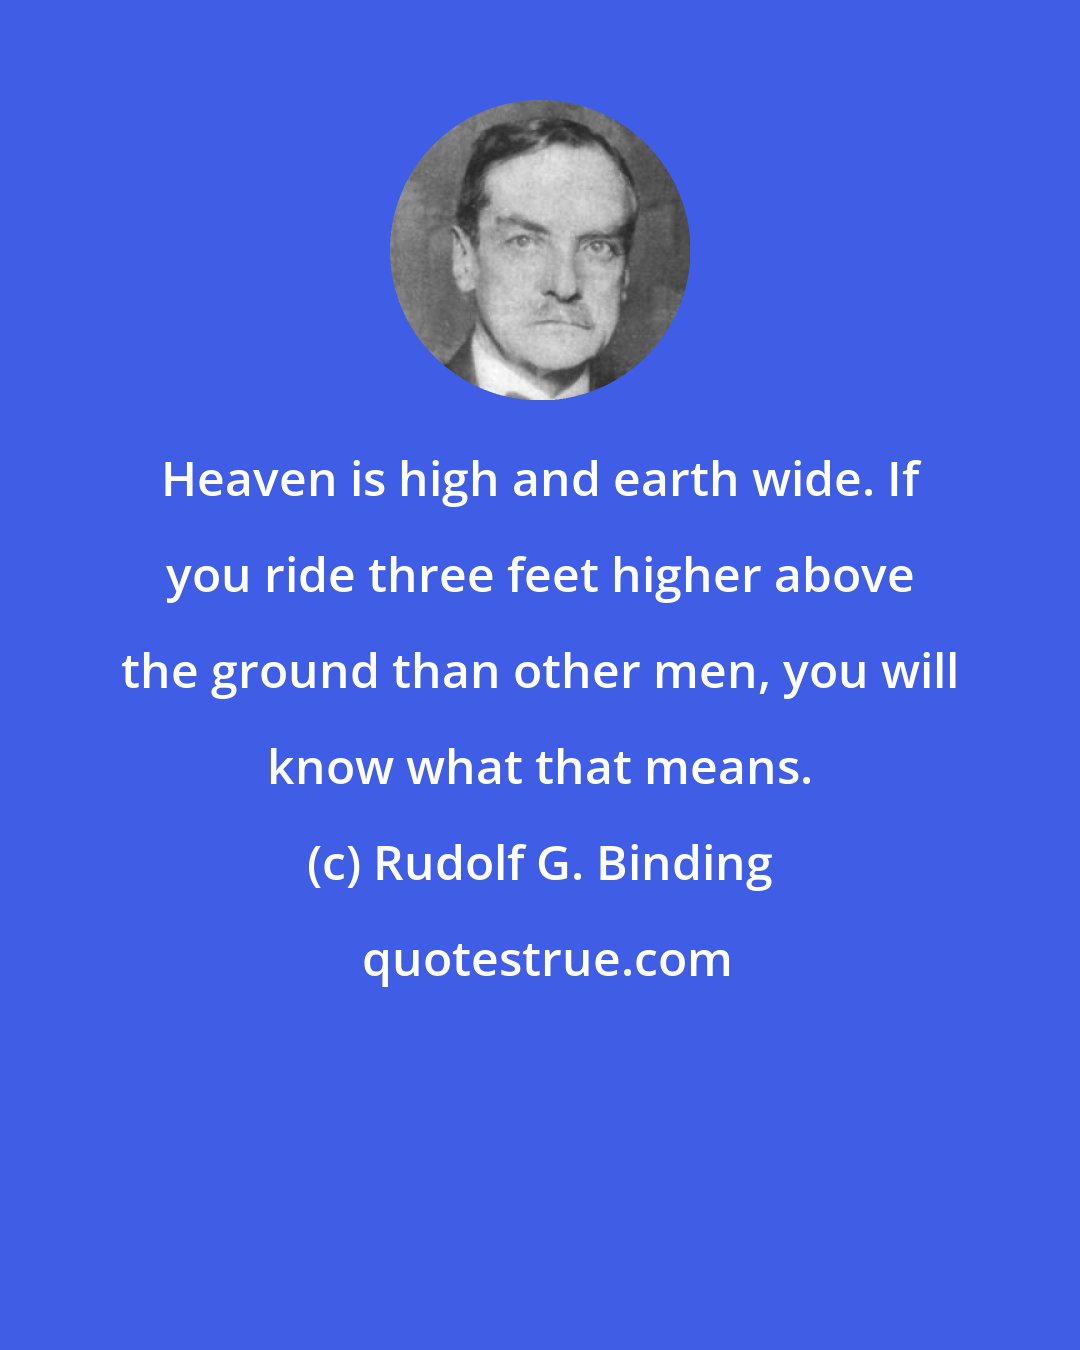 Rudolf G. Binding: Heaven is high and earth wide. If you ride three feet higher above the ground than other men, you will know what that means.